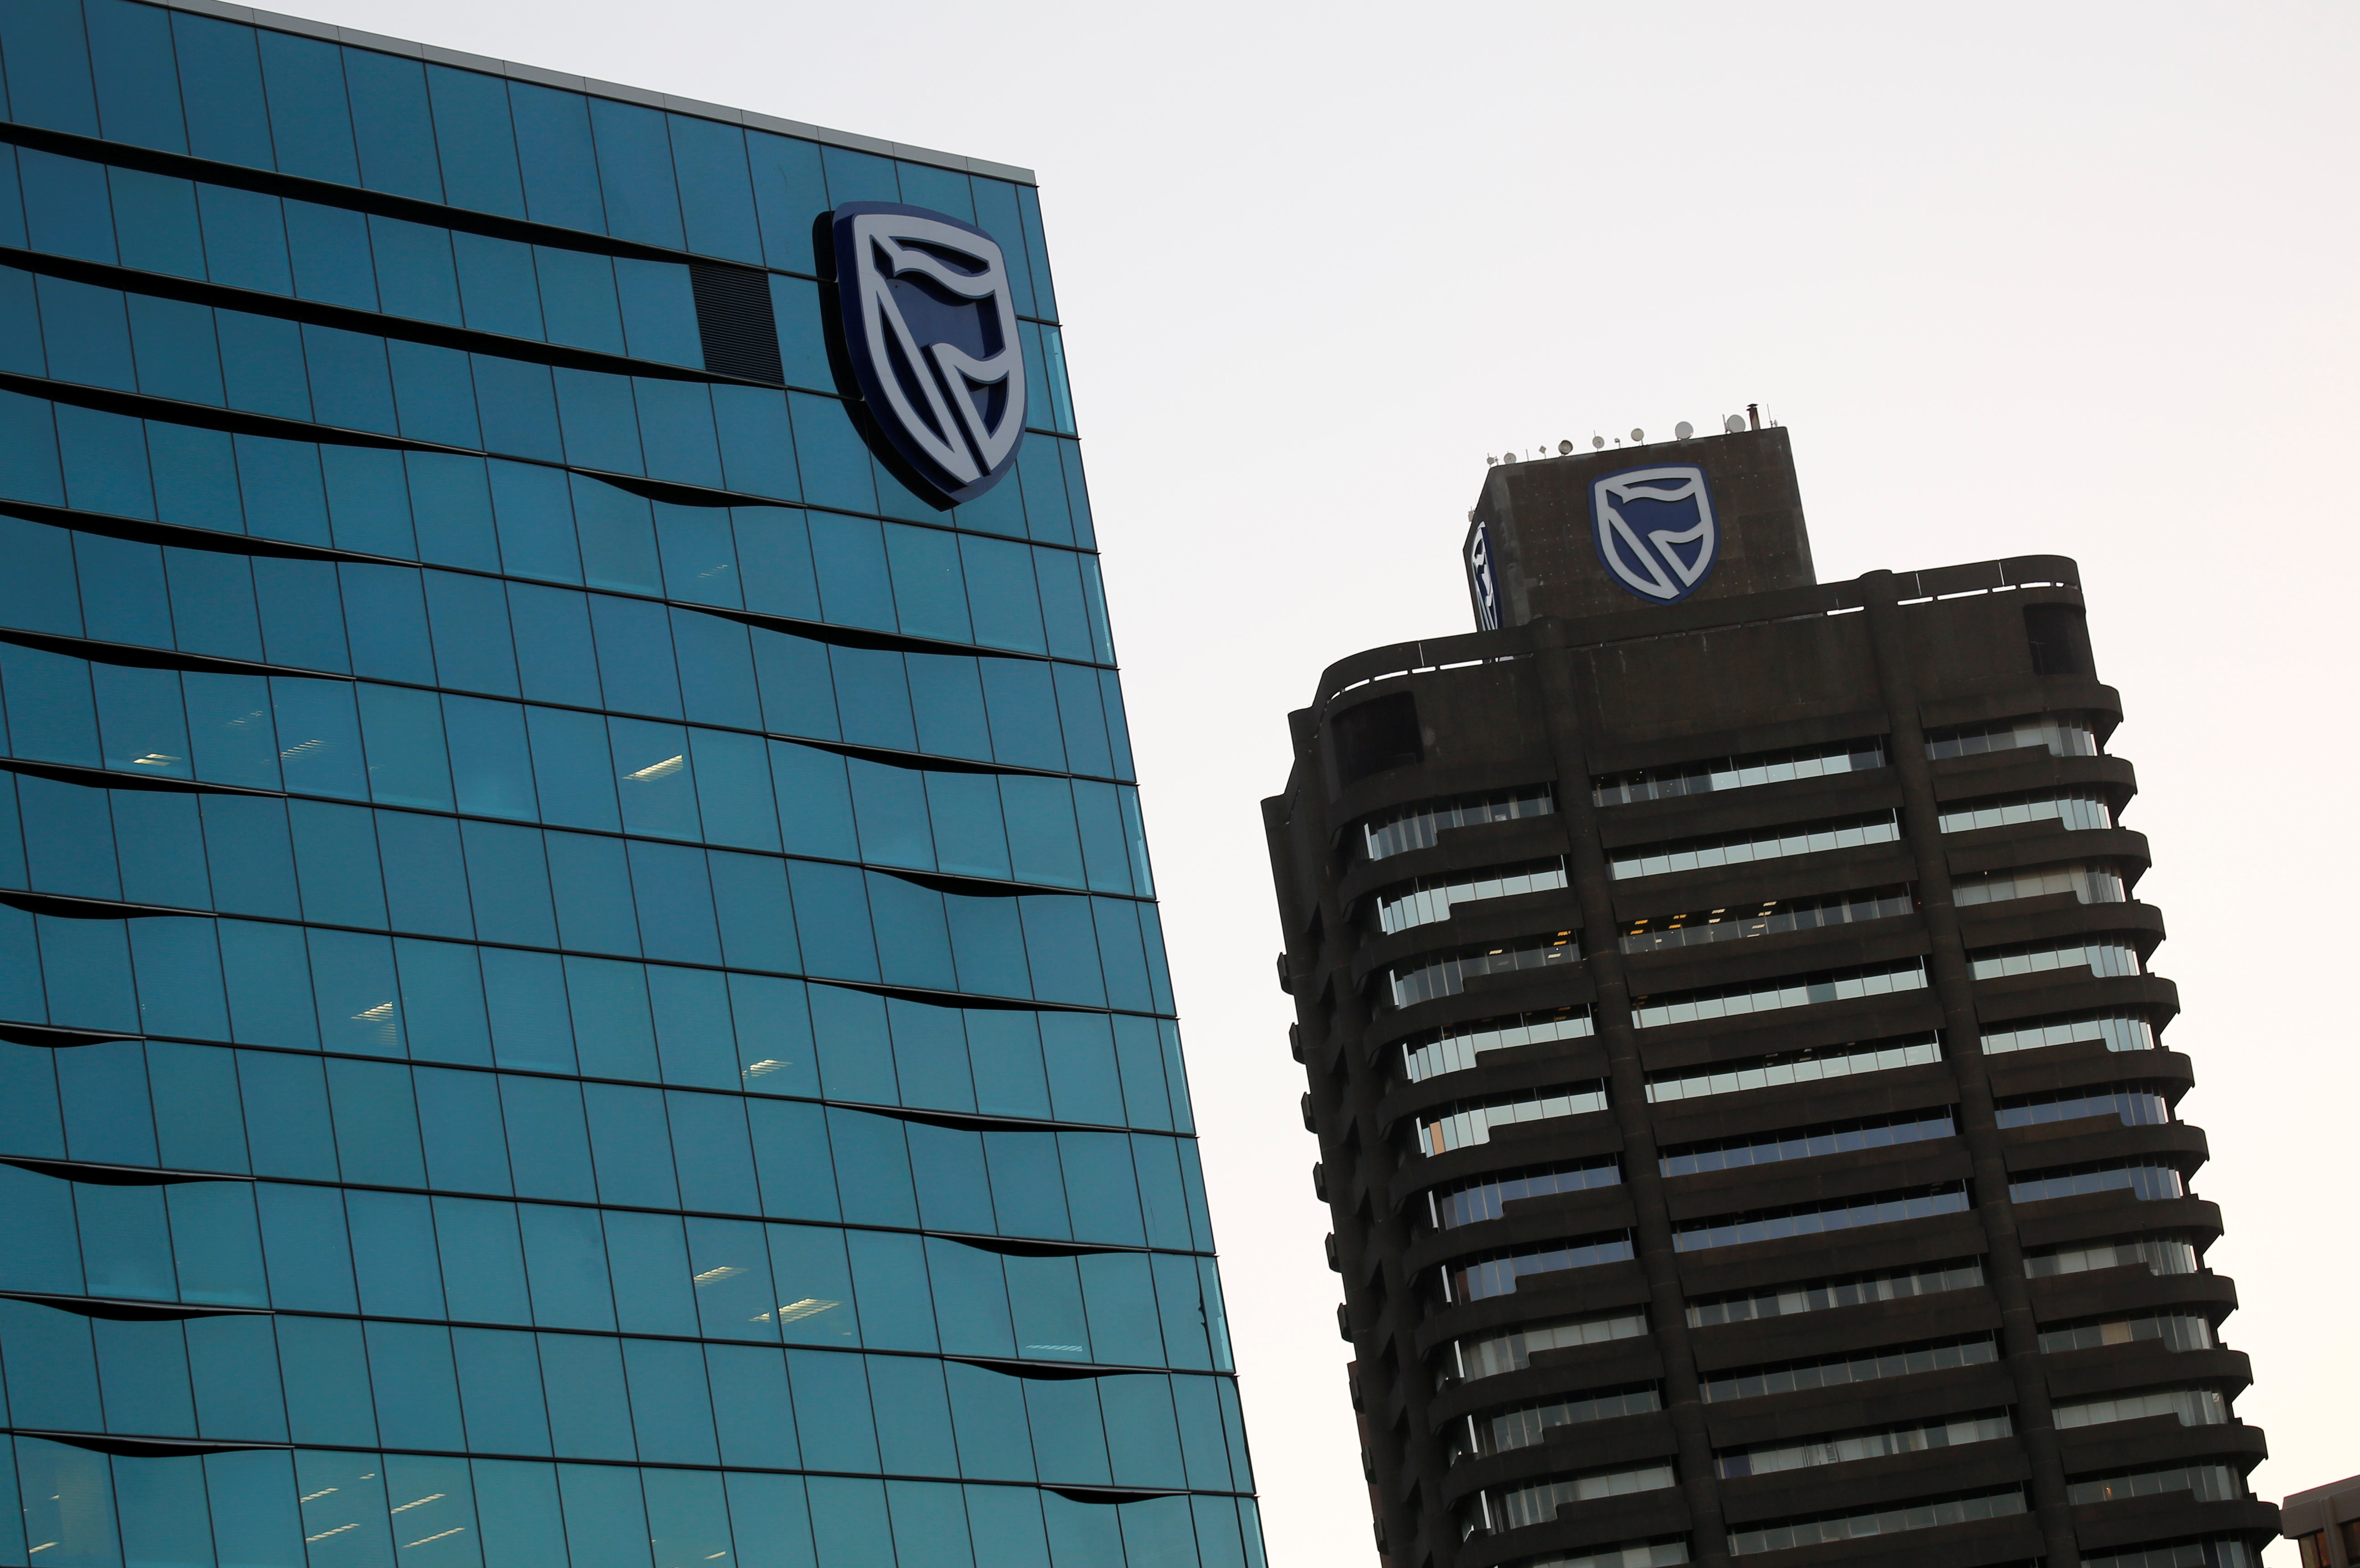 The logo of South Africa's Standard Bank is seen above the company's headquarters in Cape Town